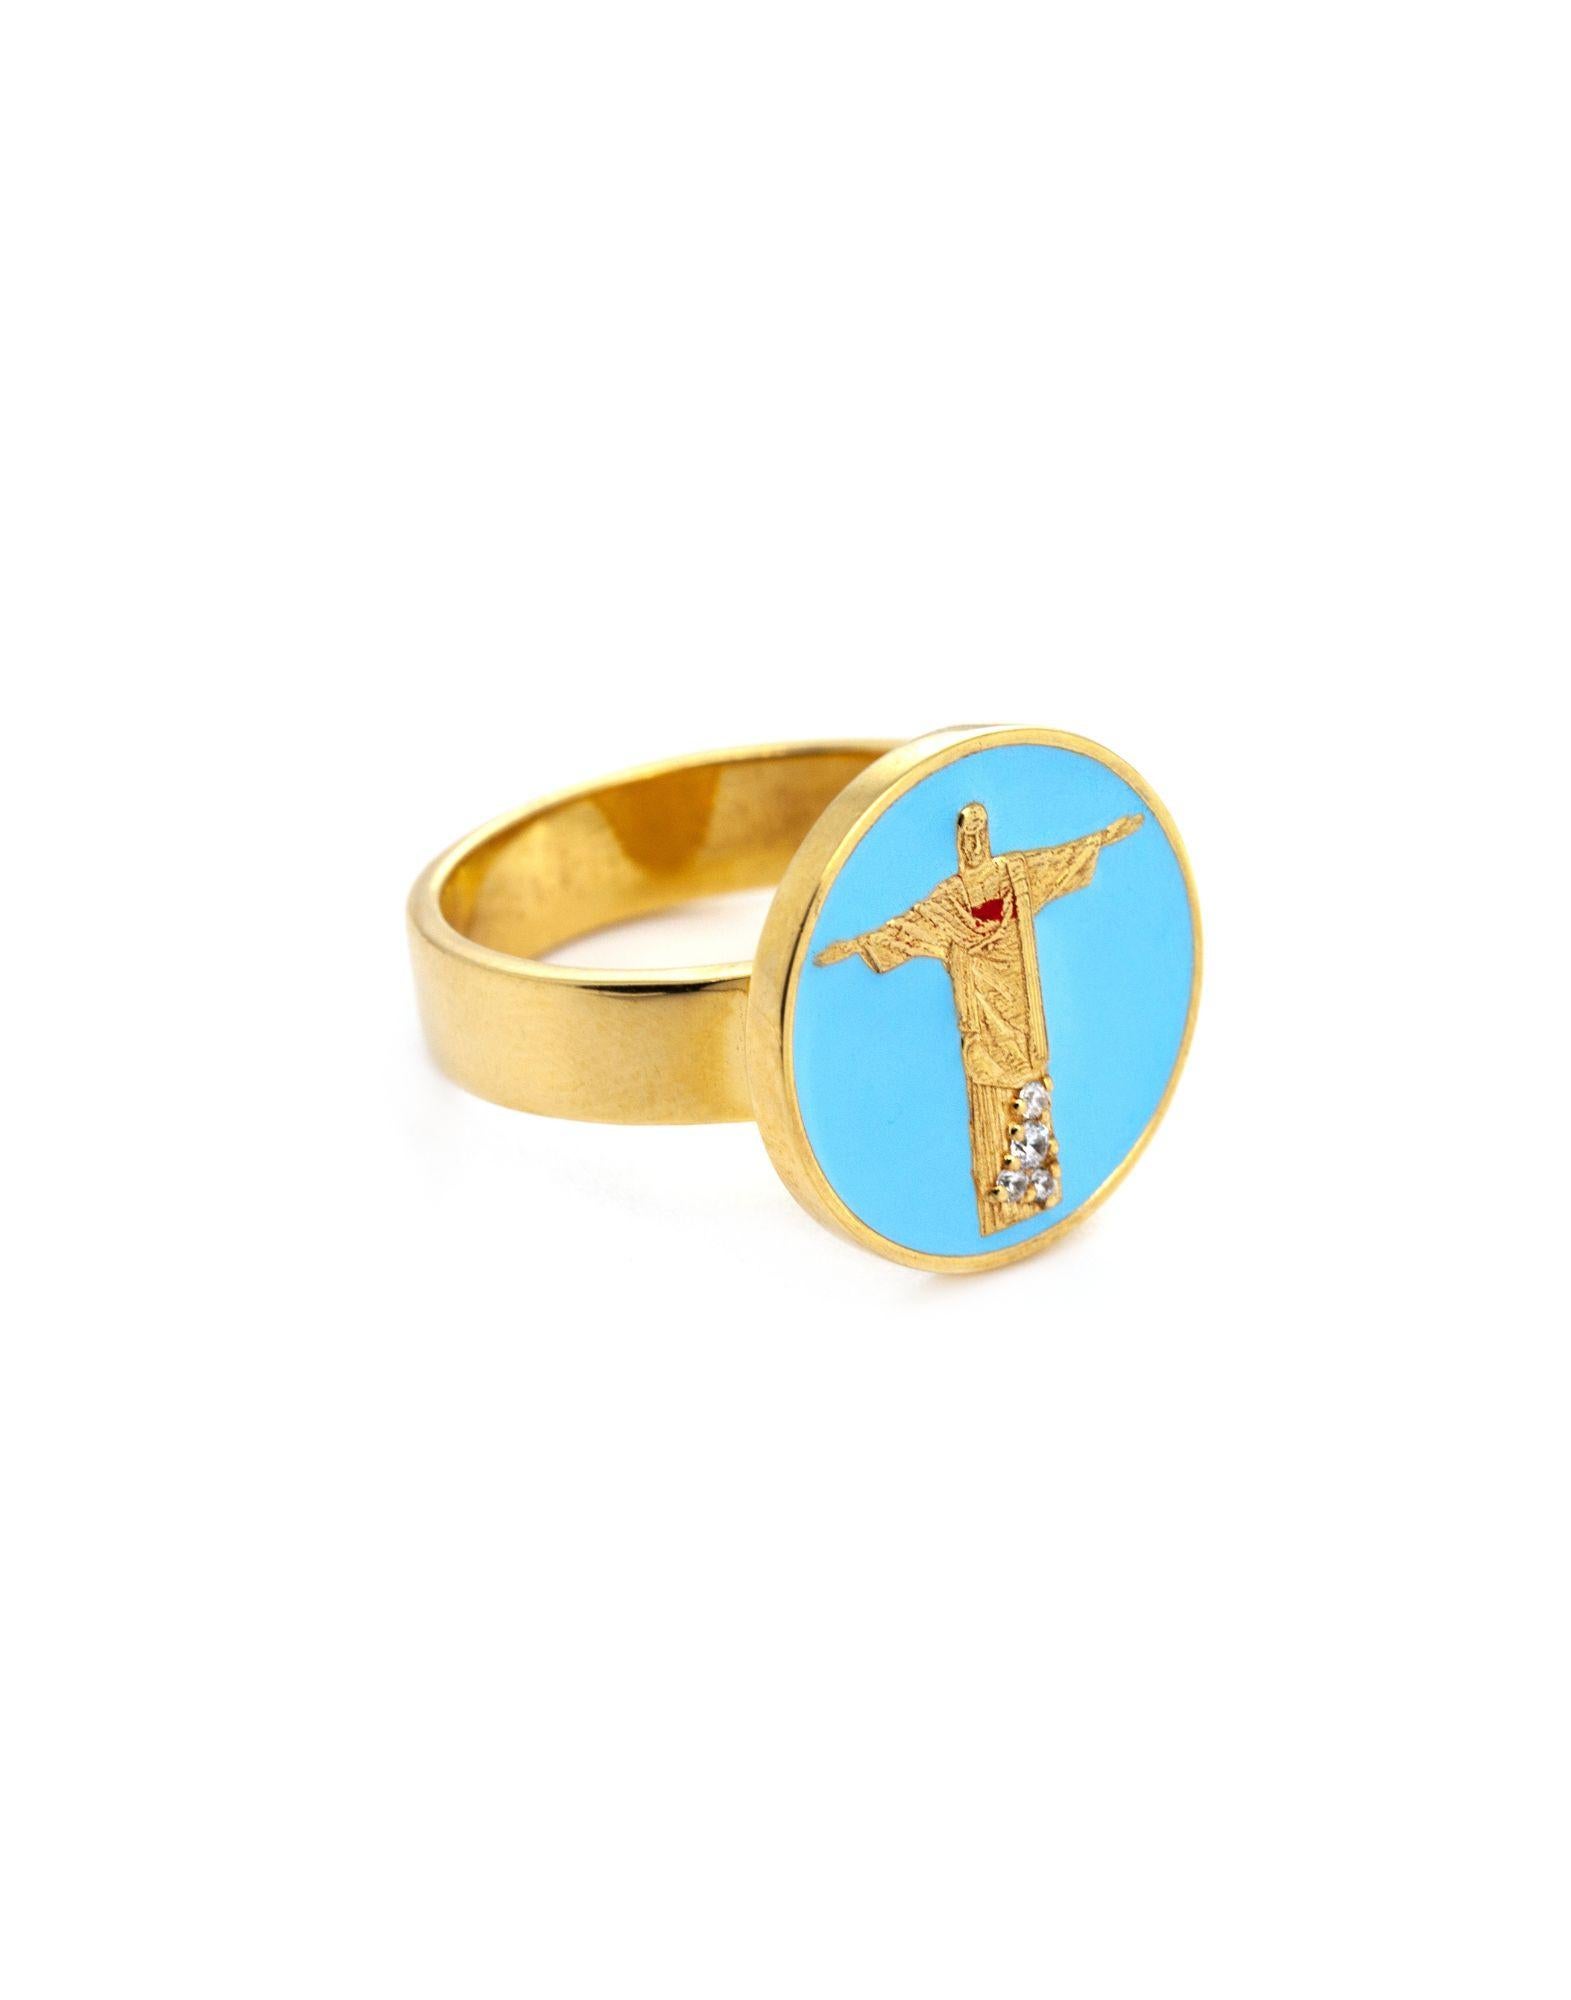 Corcovado ring in 925 gold-plated sterling silver, hand-enameled with light blue enamel

Made n Italy
Warranty and gift box THAIS BERNARDES

Corcovado ring in 925 gold-plated sterling silver, hand-enameled with light blue enamel

The Corcovado